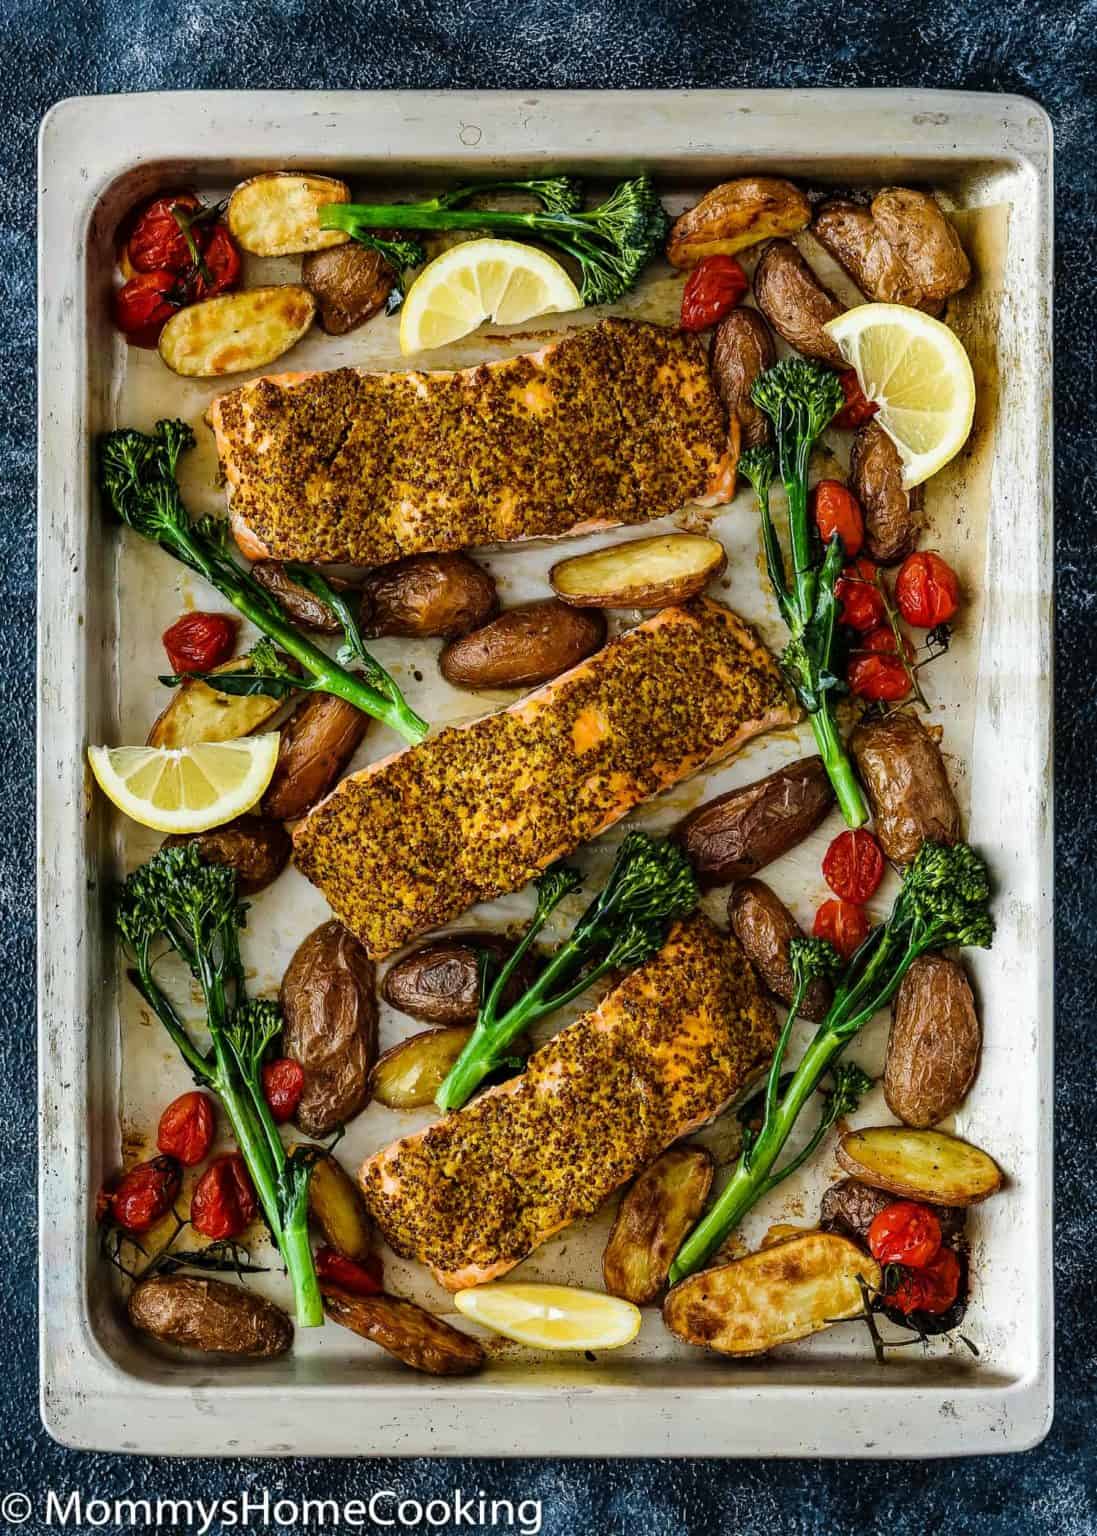 Sheet Pan Mustard Salmon Dinner (Quick & Easy) - Mommy's Home Cooking